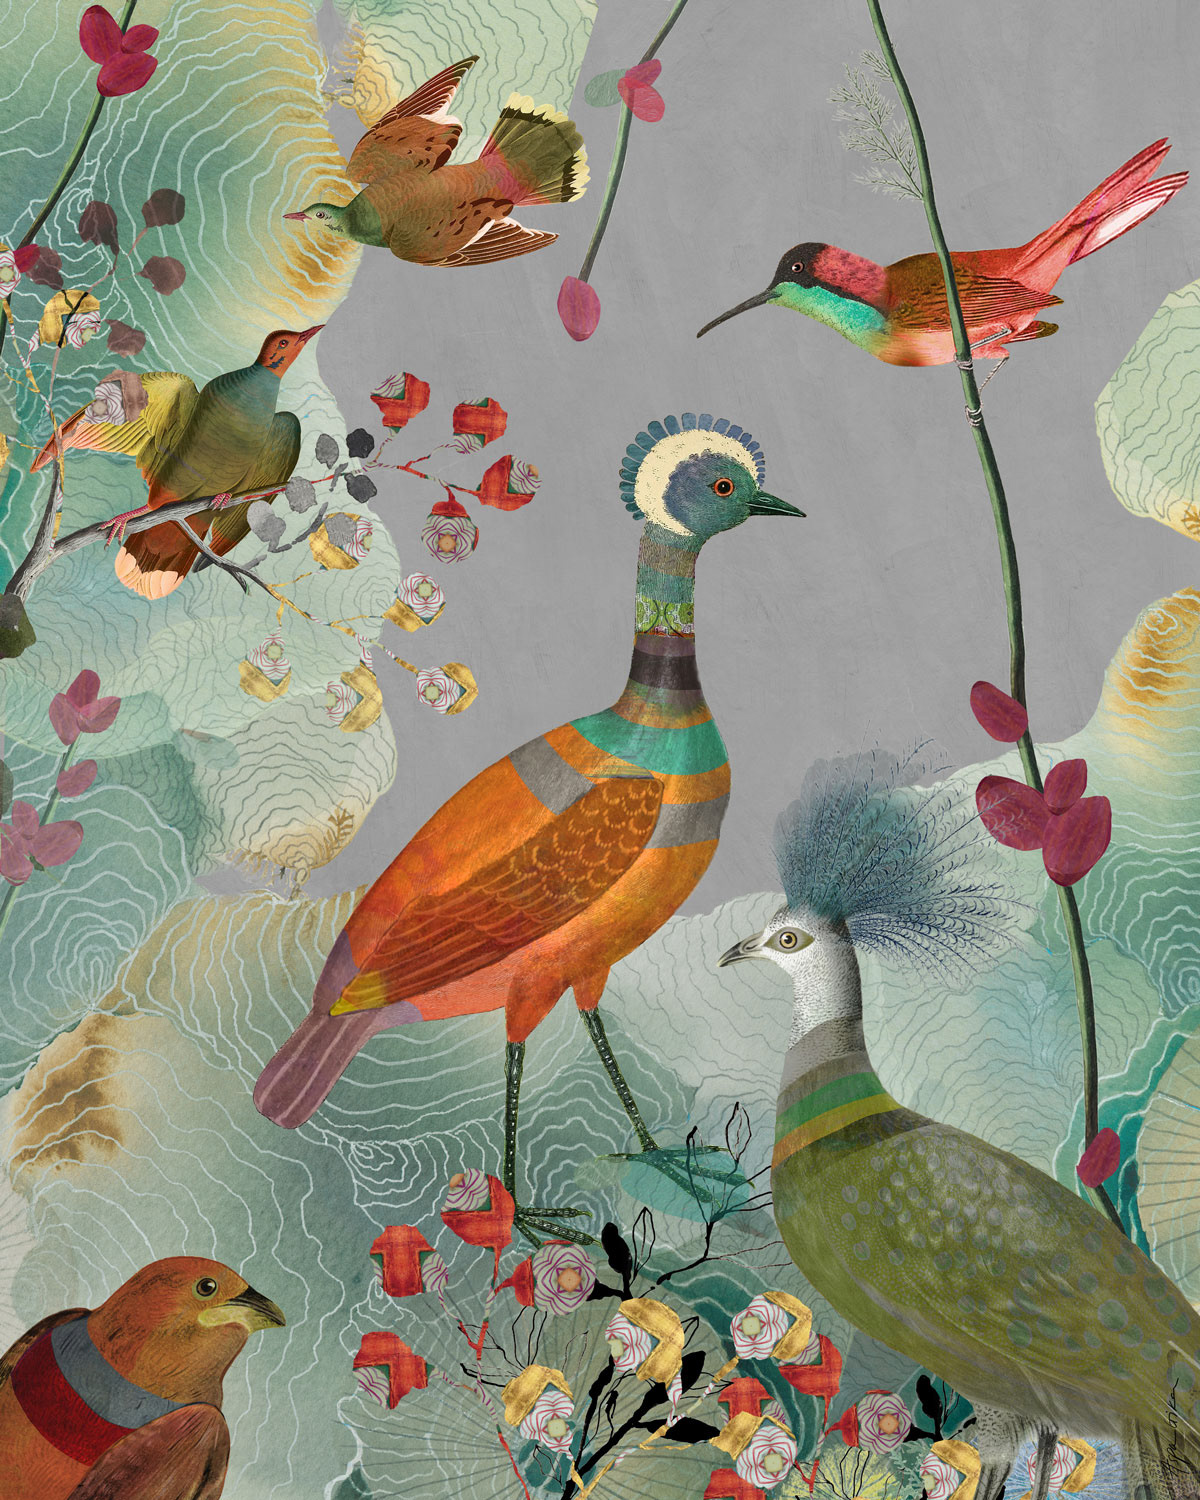 Colorful Imaginary birds and patterned florals surrounded by organic shapes of abstract clouds.